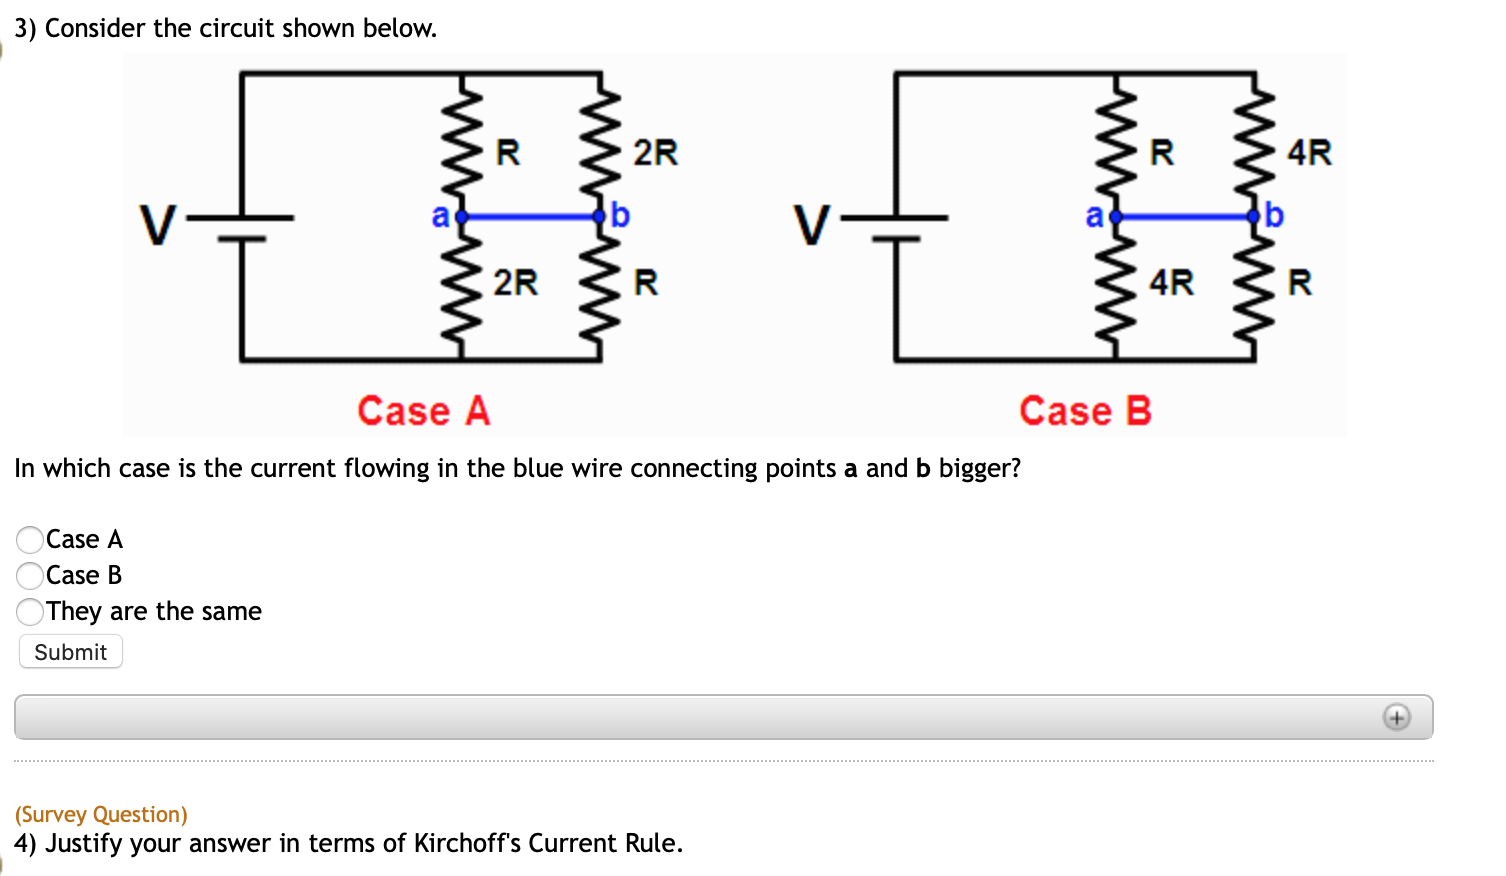 3) Consider the circuit shown below.
4R
2R
2R
4R
Case A
Case B
In which case is the current flowing in the blue wire connecting points a and b bigger?
Case A
Case B
They are the same
Submit
(Survey Question)
4) Justify your answer in terms of Kirchoff's Current Rule.
